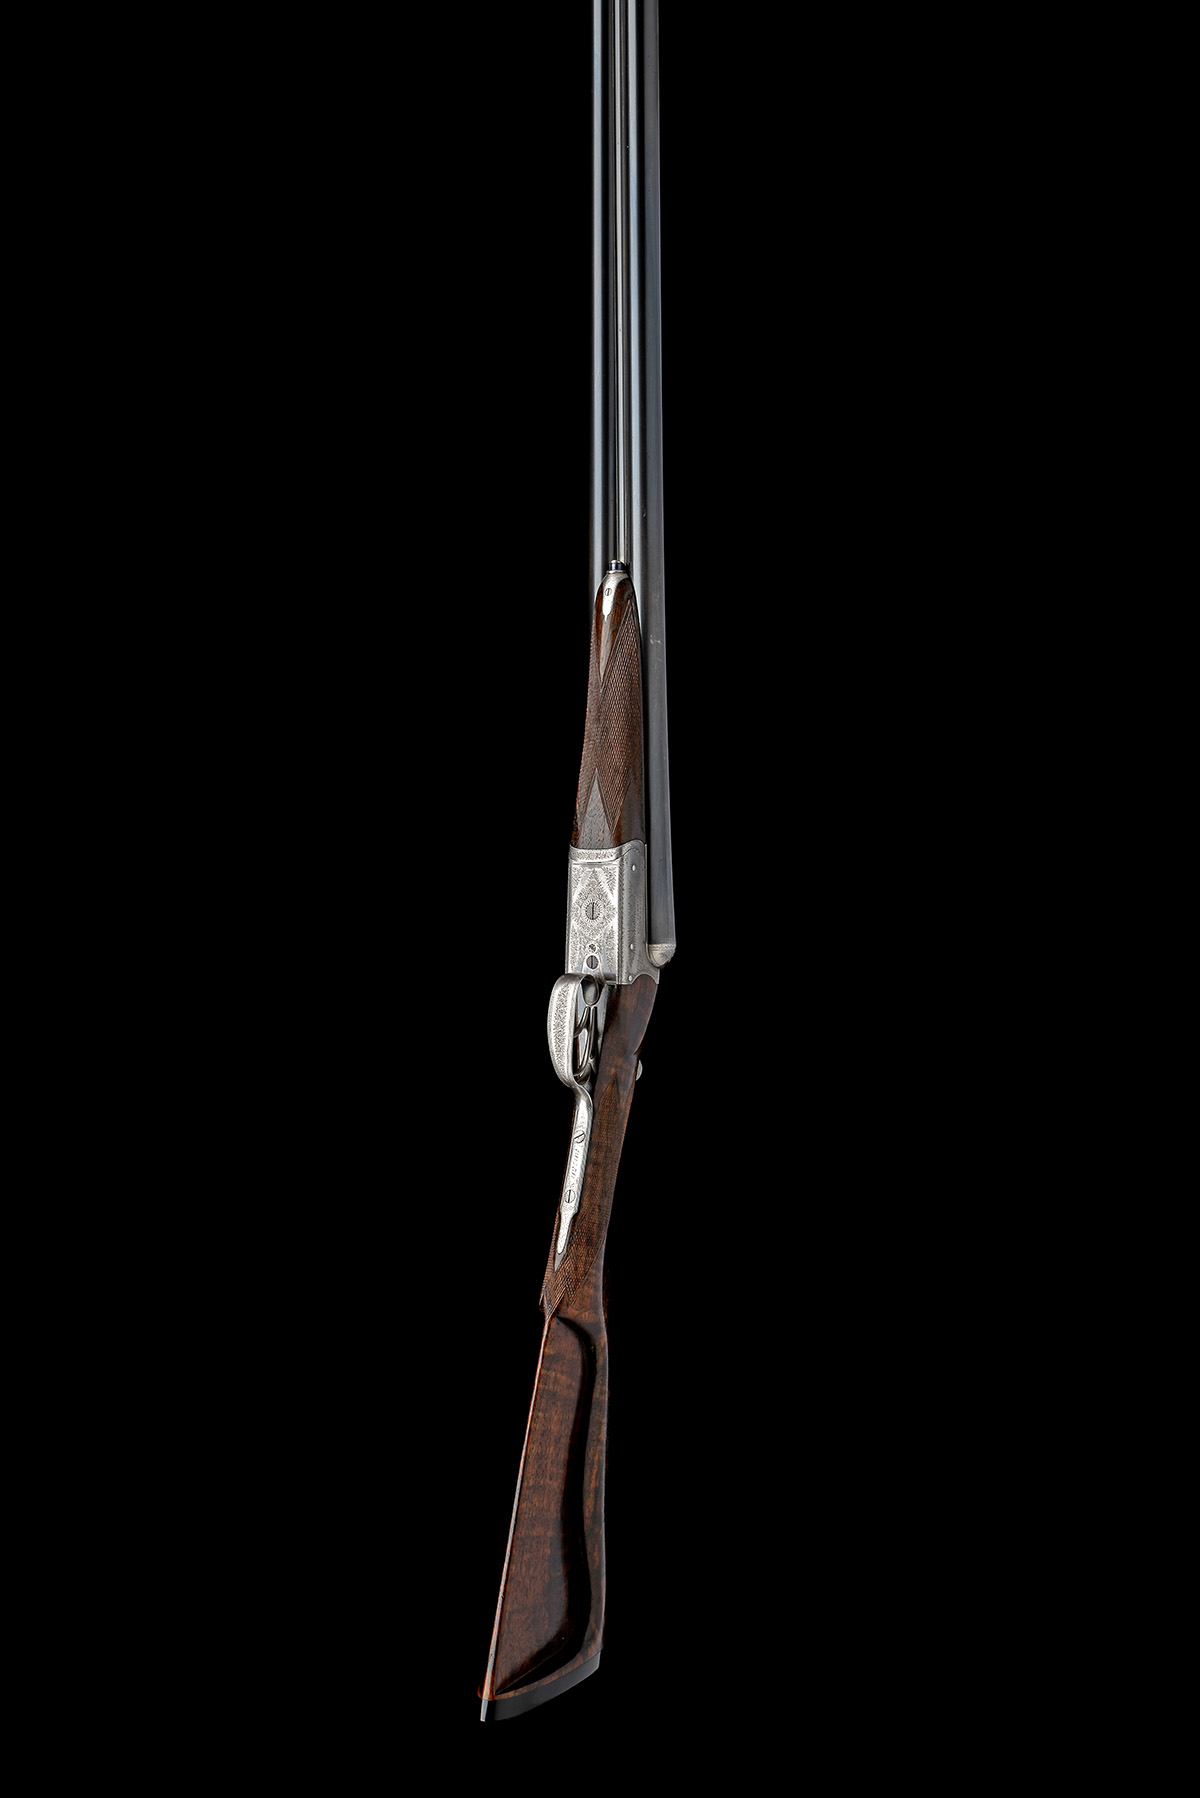 WEBLEY & SCOTT ARMS CO. LTD AN ULTRA-LIGHTWEIGHT 12-BORE BOXLOCK NON-EJECTOR, serial no. 80150, - Image 8 of 8